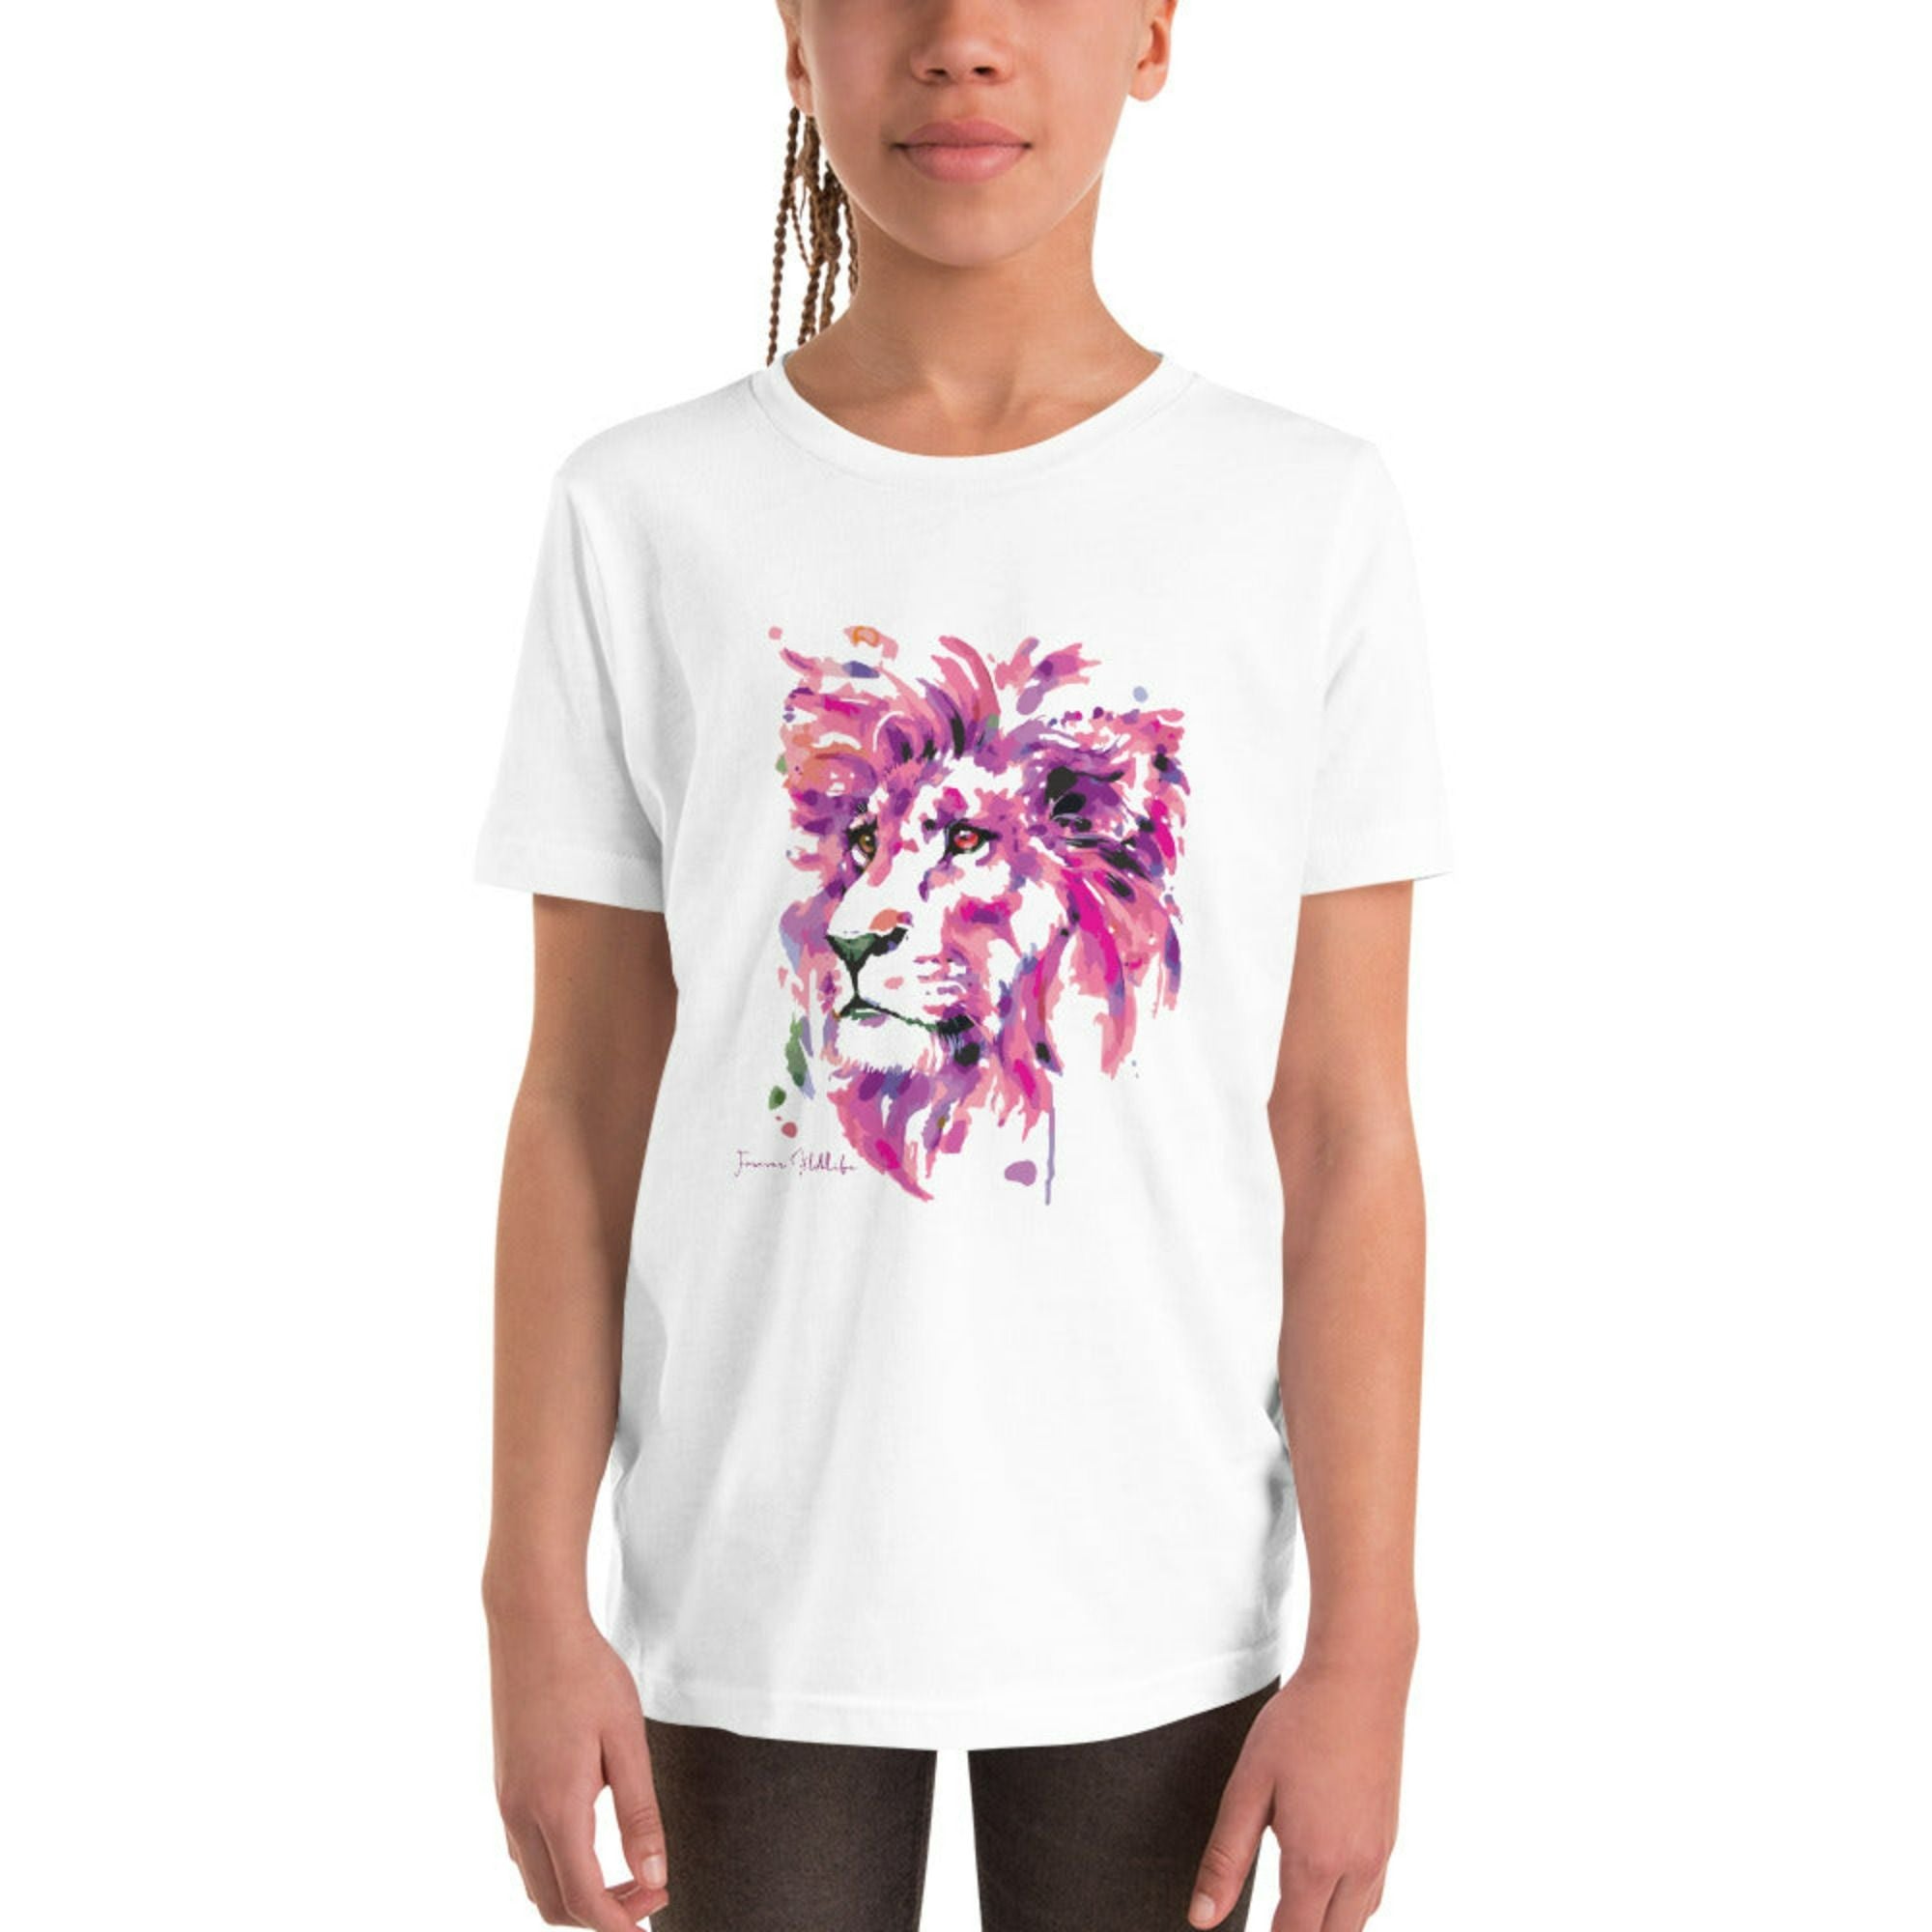 Teen wearing White Youth T-Shirt with colored lion graphic as part of Wildlife T Shirts, Wildlife Clothing & Apparel by Forever Wildlife